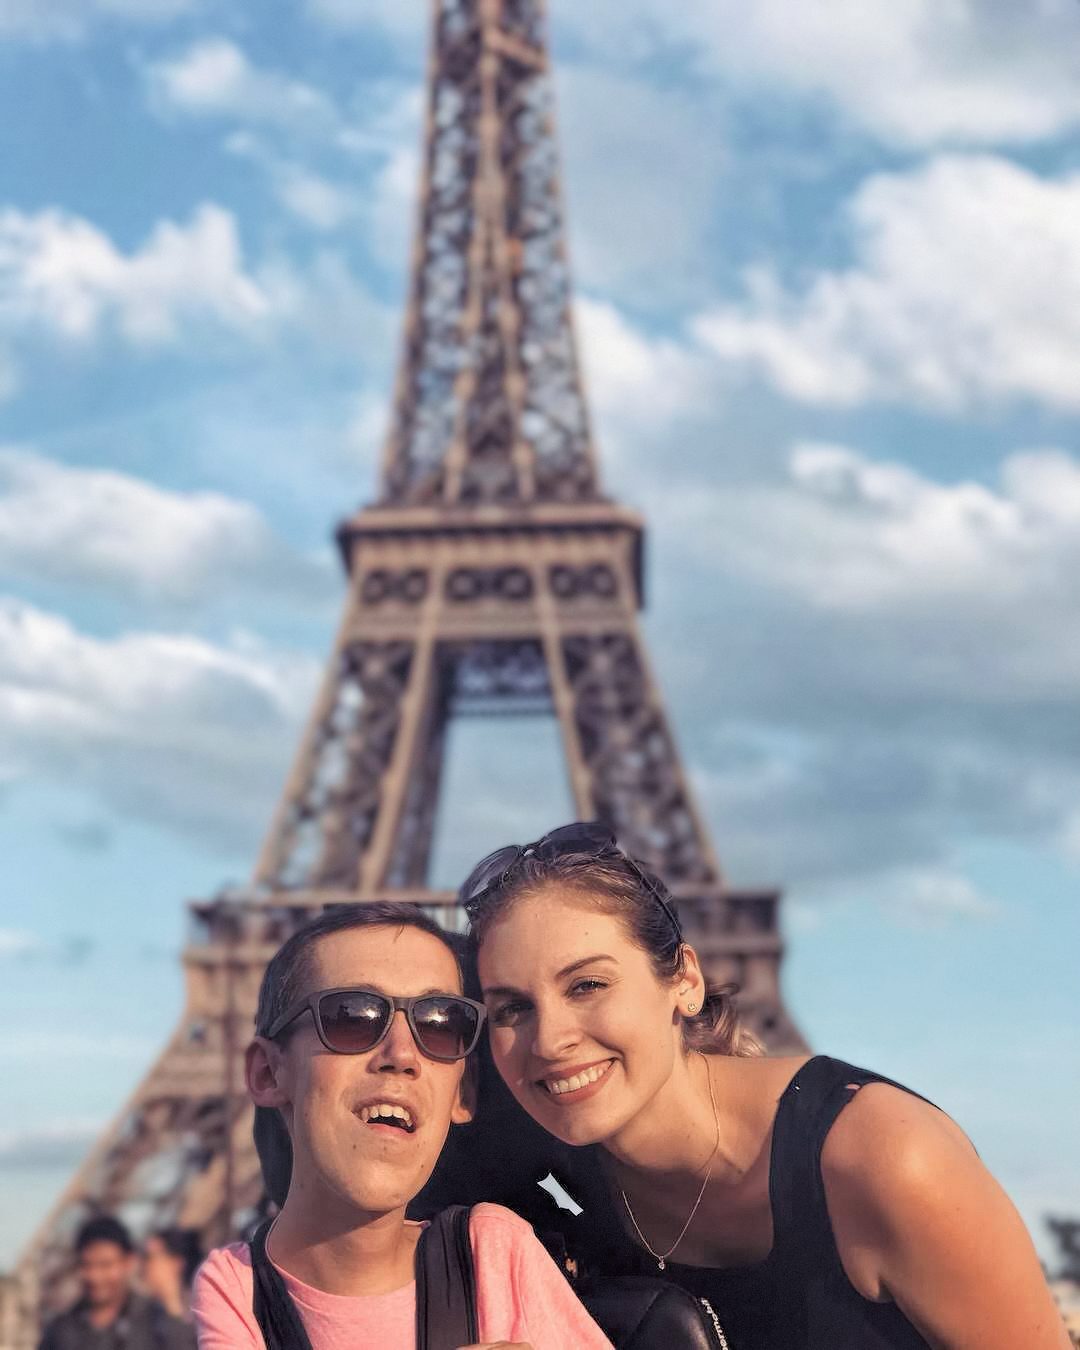 Aylward and Burcaw pose at the Eiffel Tower